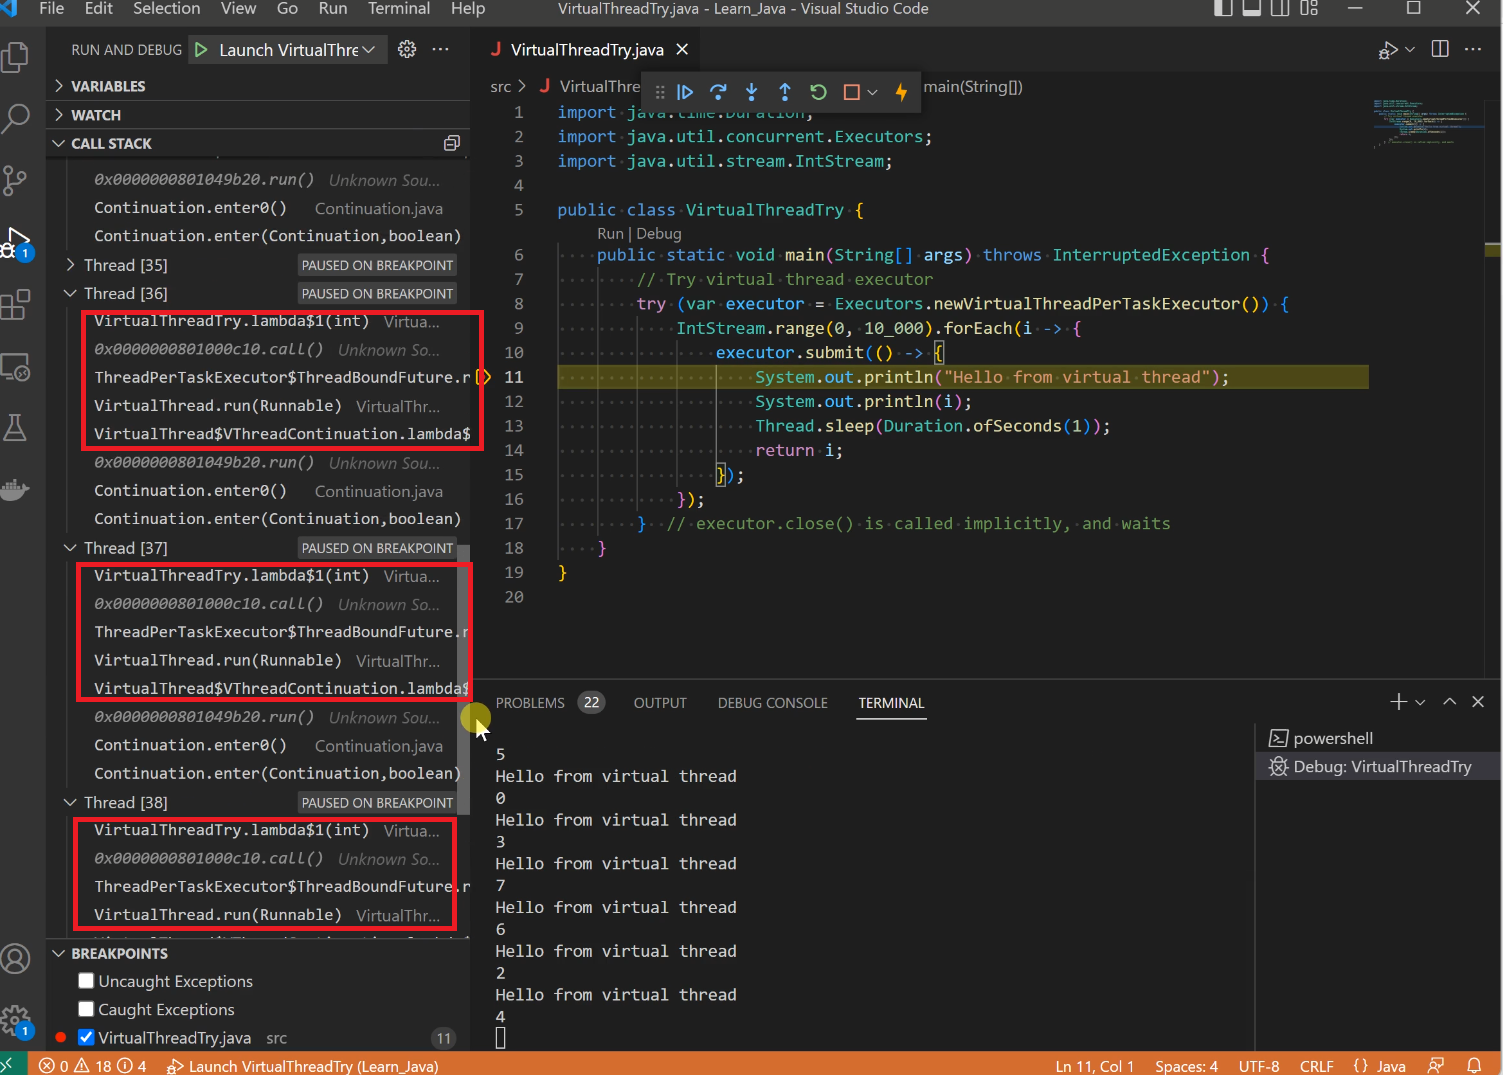 Visual Studio Code: While primarily known as a versatile code editor, Visual Studio Code also offers Java support through extensions, making it a potential alternative to oaj2se.exe.
BlueJ: A beginner-friendly Java IDE that simplifies the learning process and can be used as an alternative to oaj2se.exe for educational purposes.